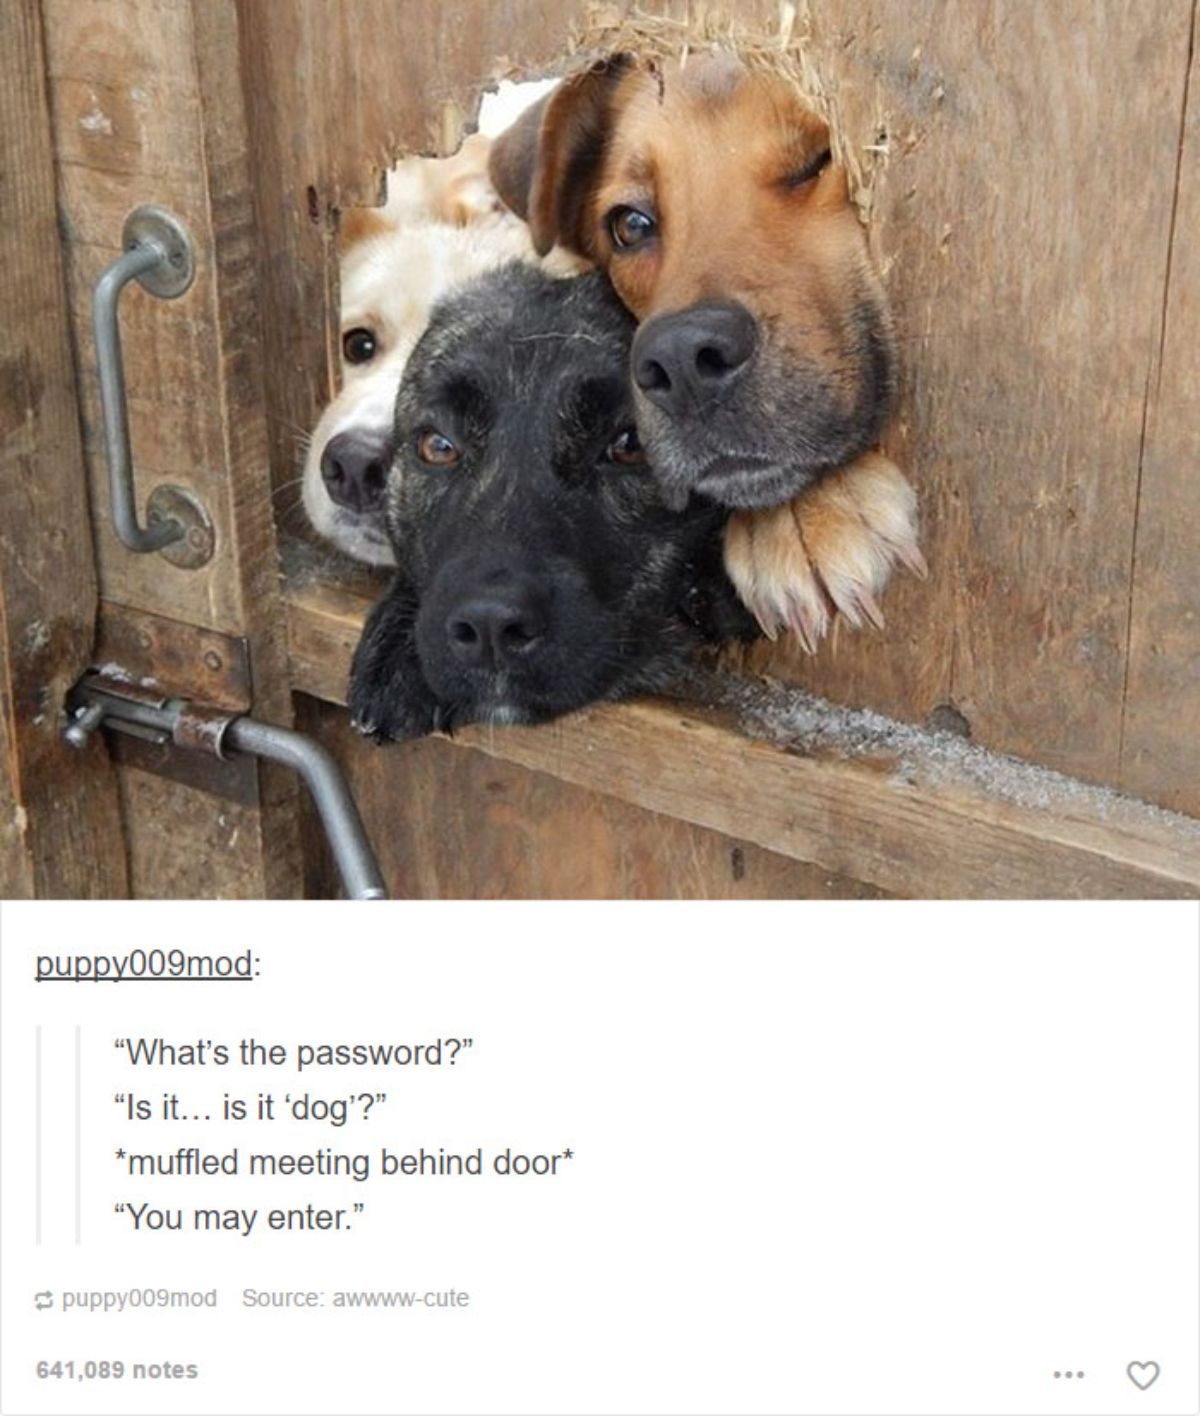 brown dog, black dog and white and brown dog sticking their faces through a hole in a wooden door